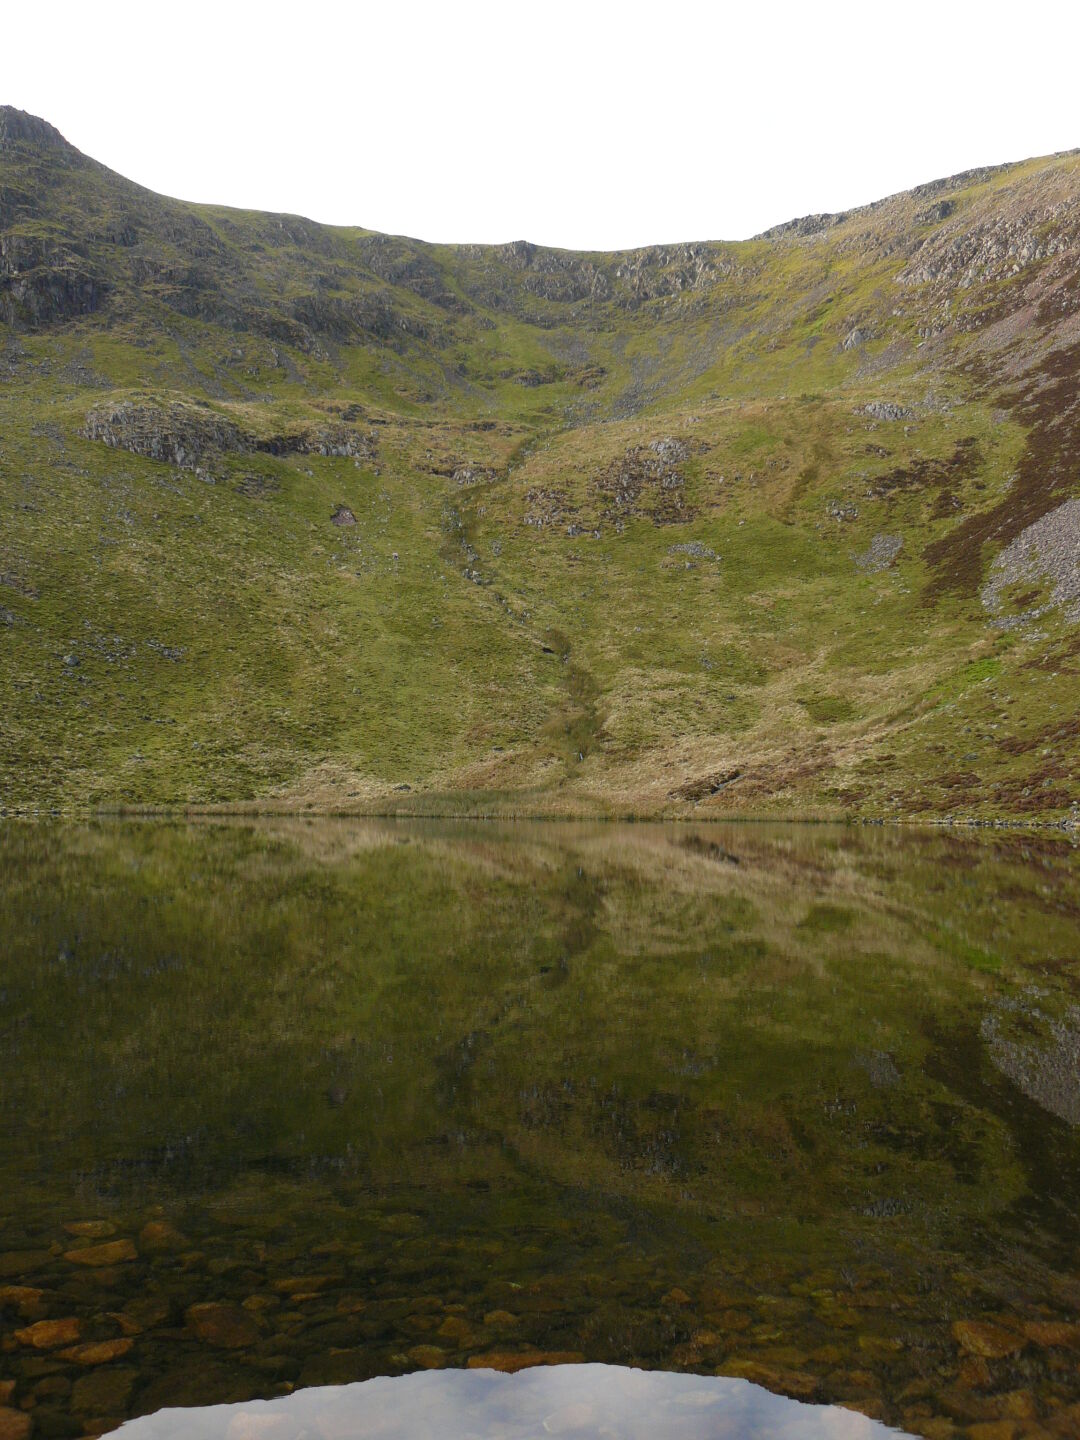 Looking over Bleaberry Tarn towards the Red Pike (755m), which we walked up then.